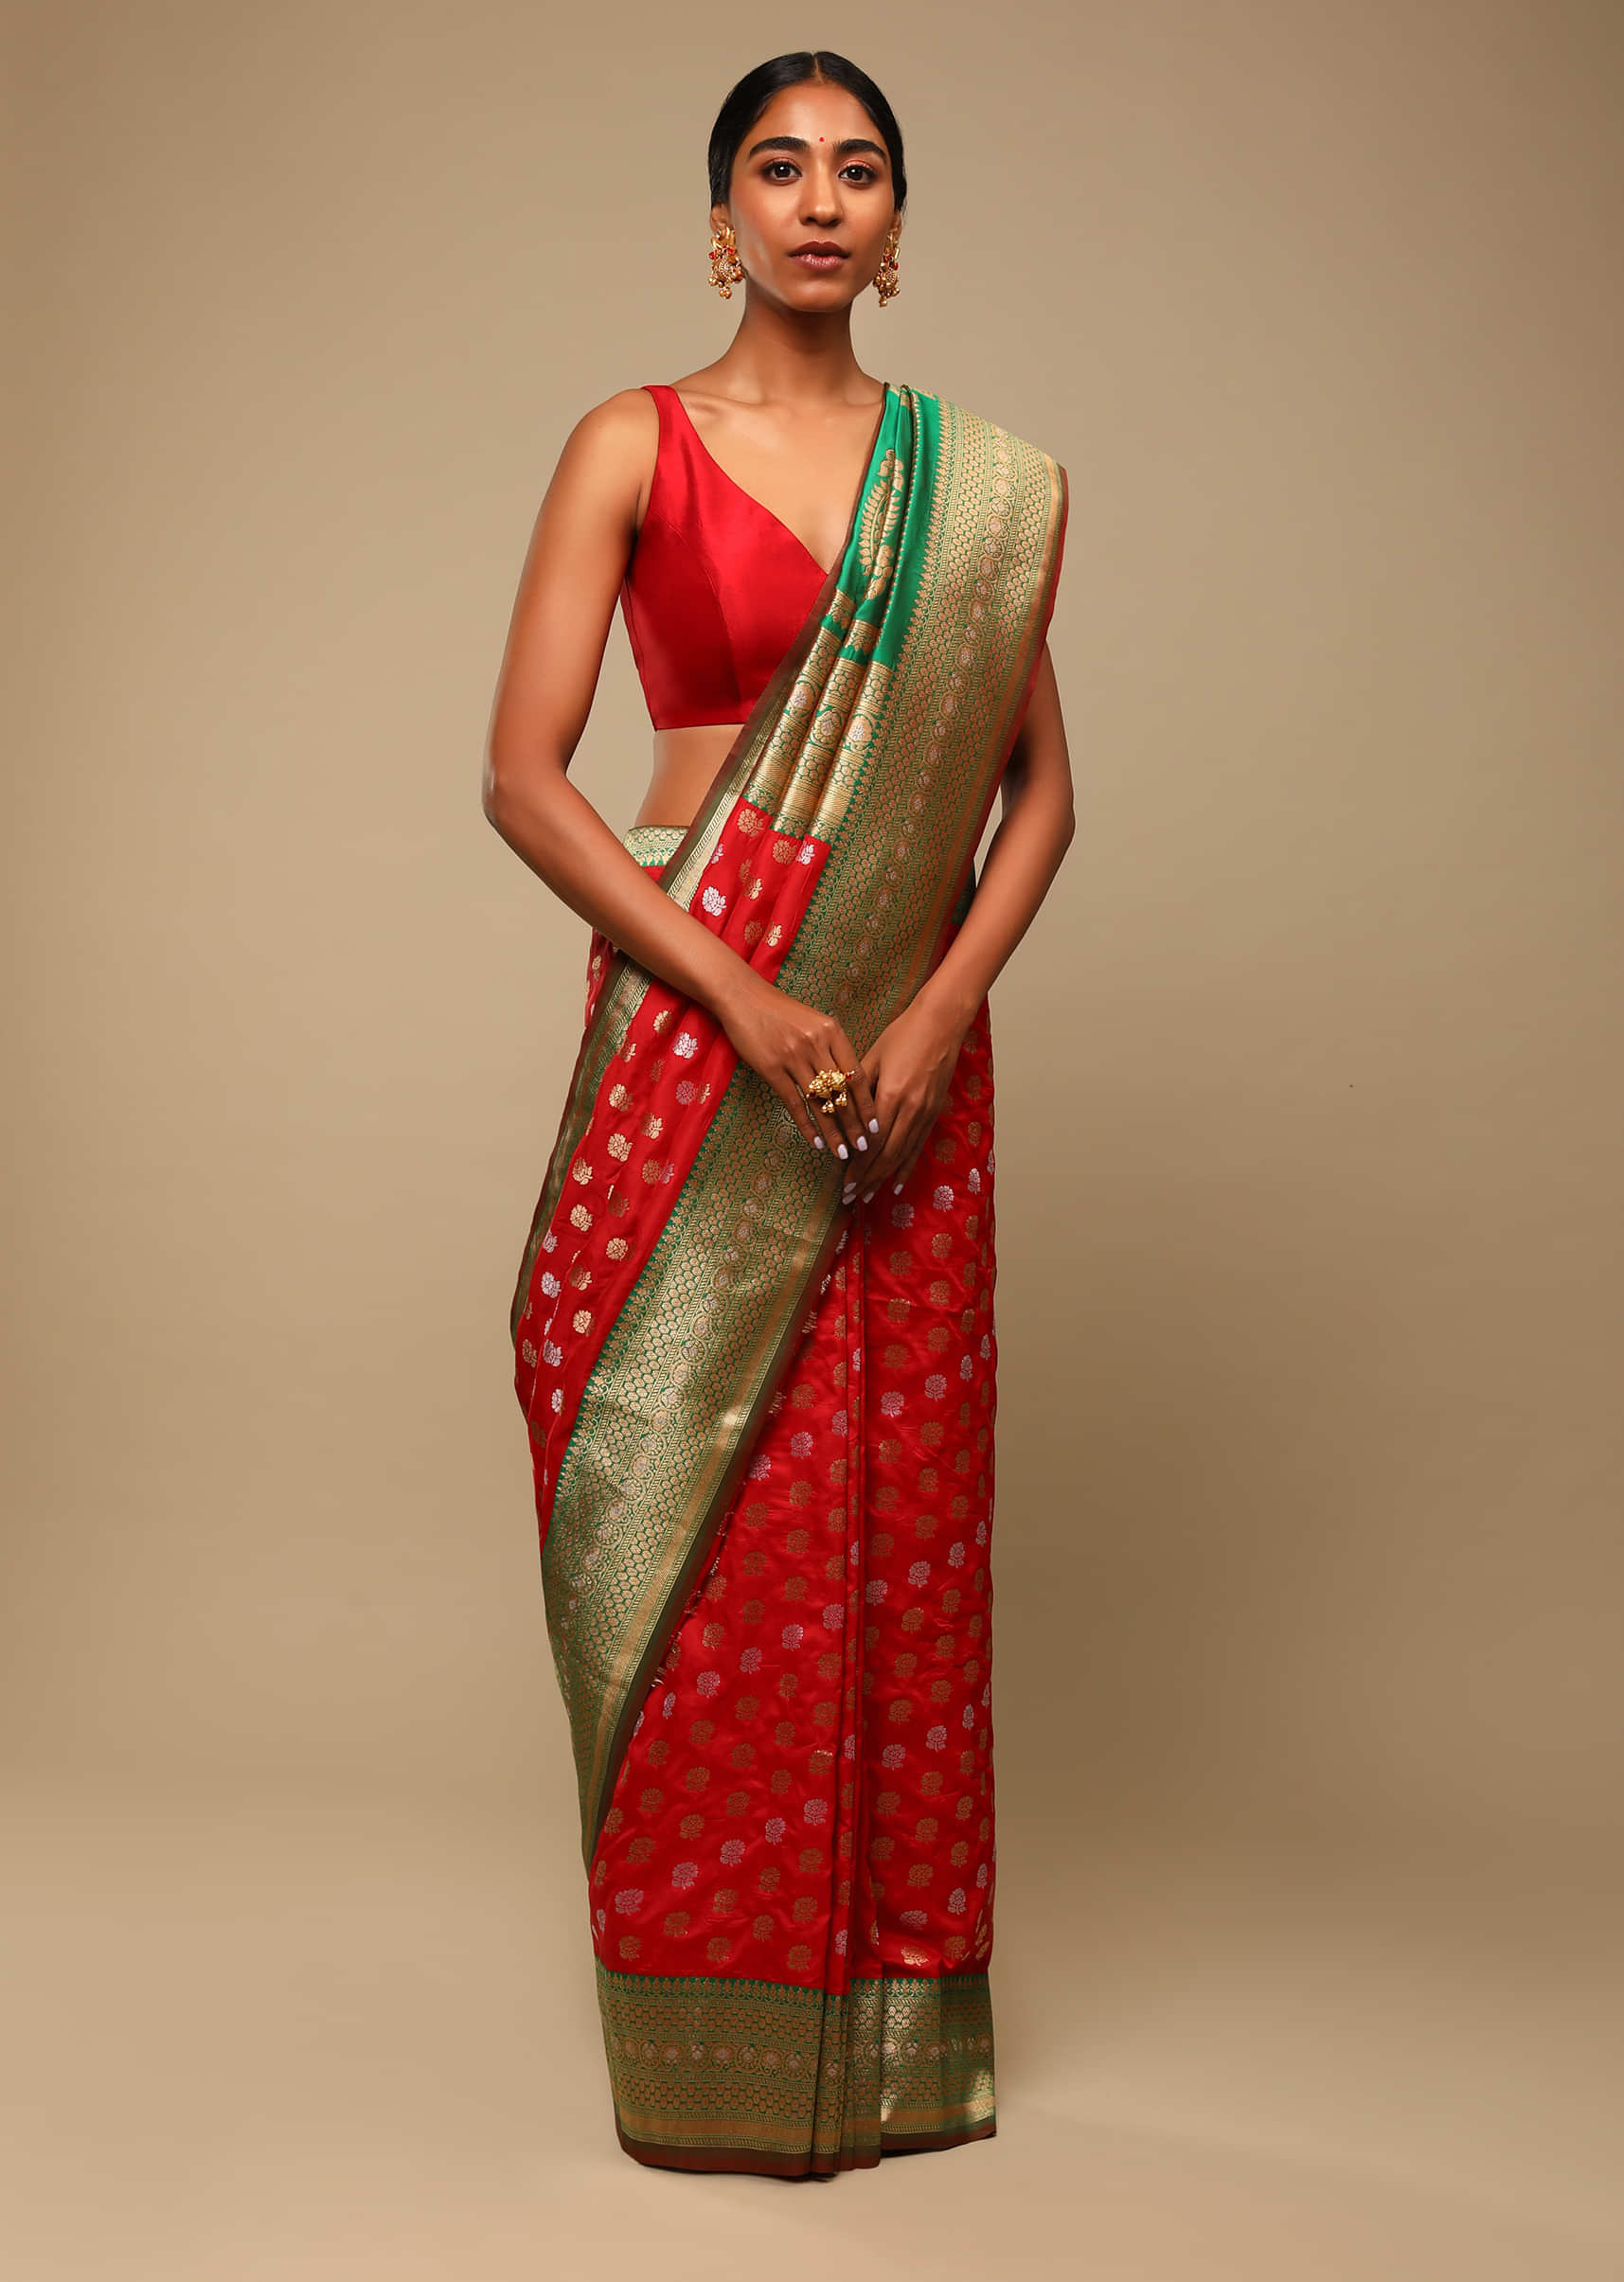 Vermillion Red Saree In Art Handloom Silk With Green Woven Border And Two Toned Buttis Along With Unstitched Blouse  